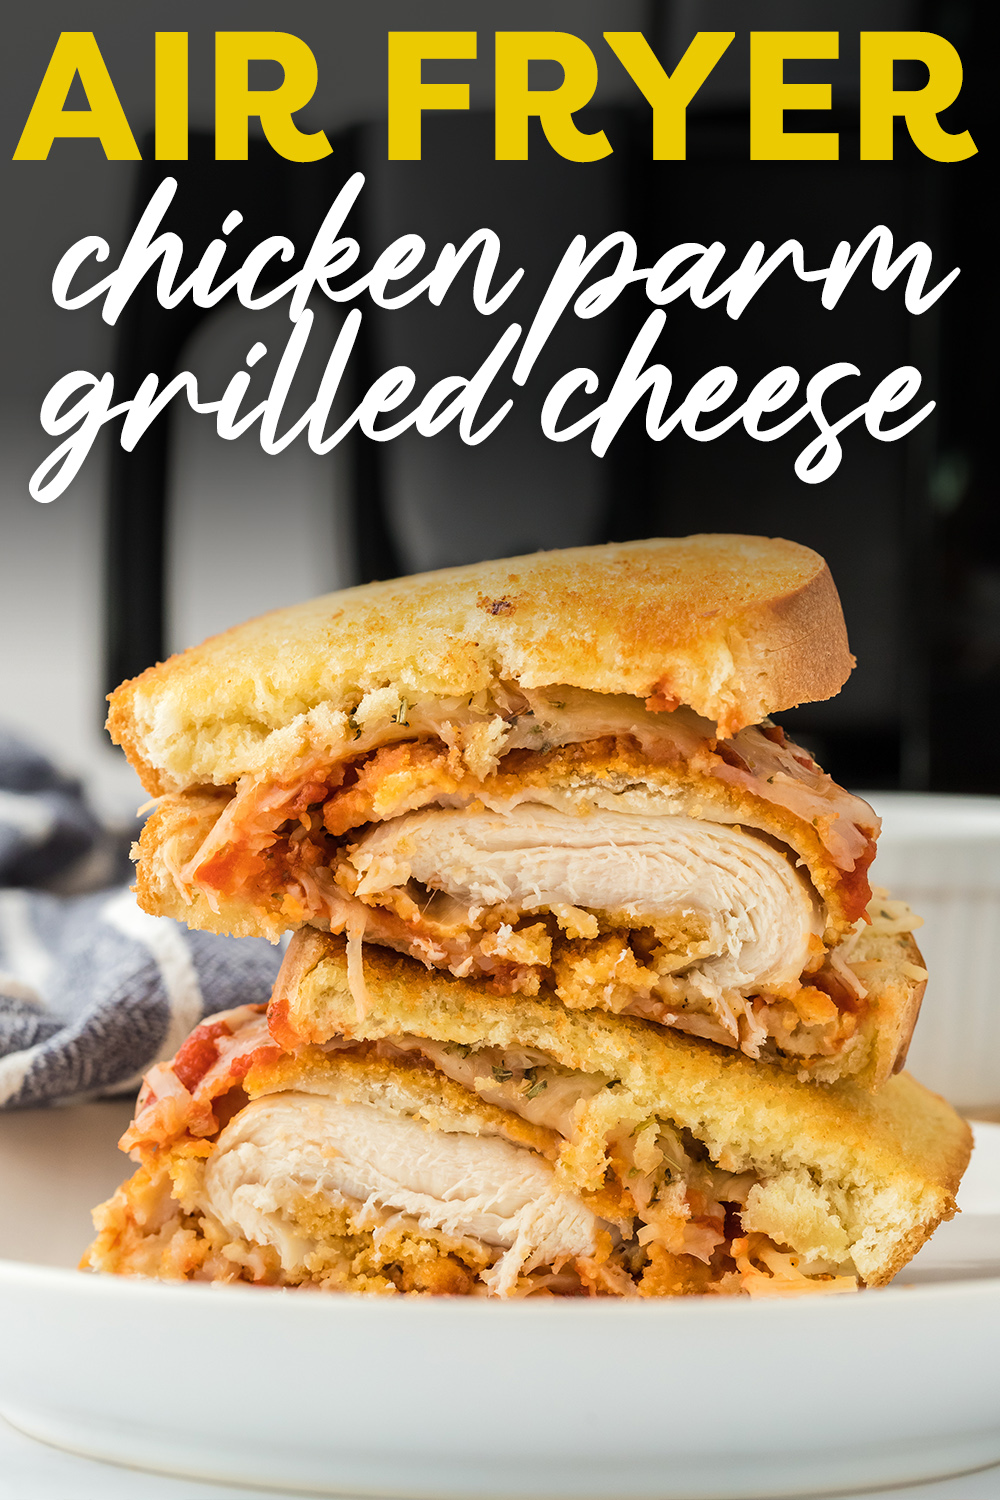 Chicken Parmesan sandwich cut in half and stacked on top of itself.